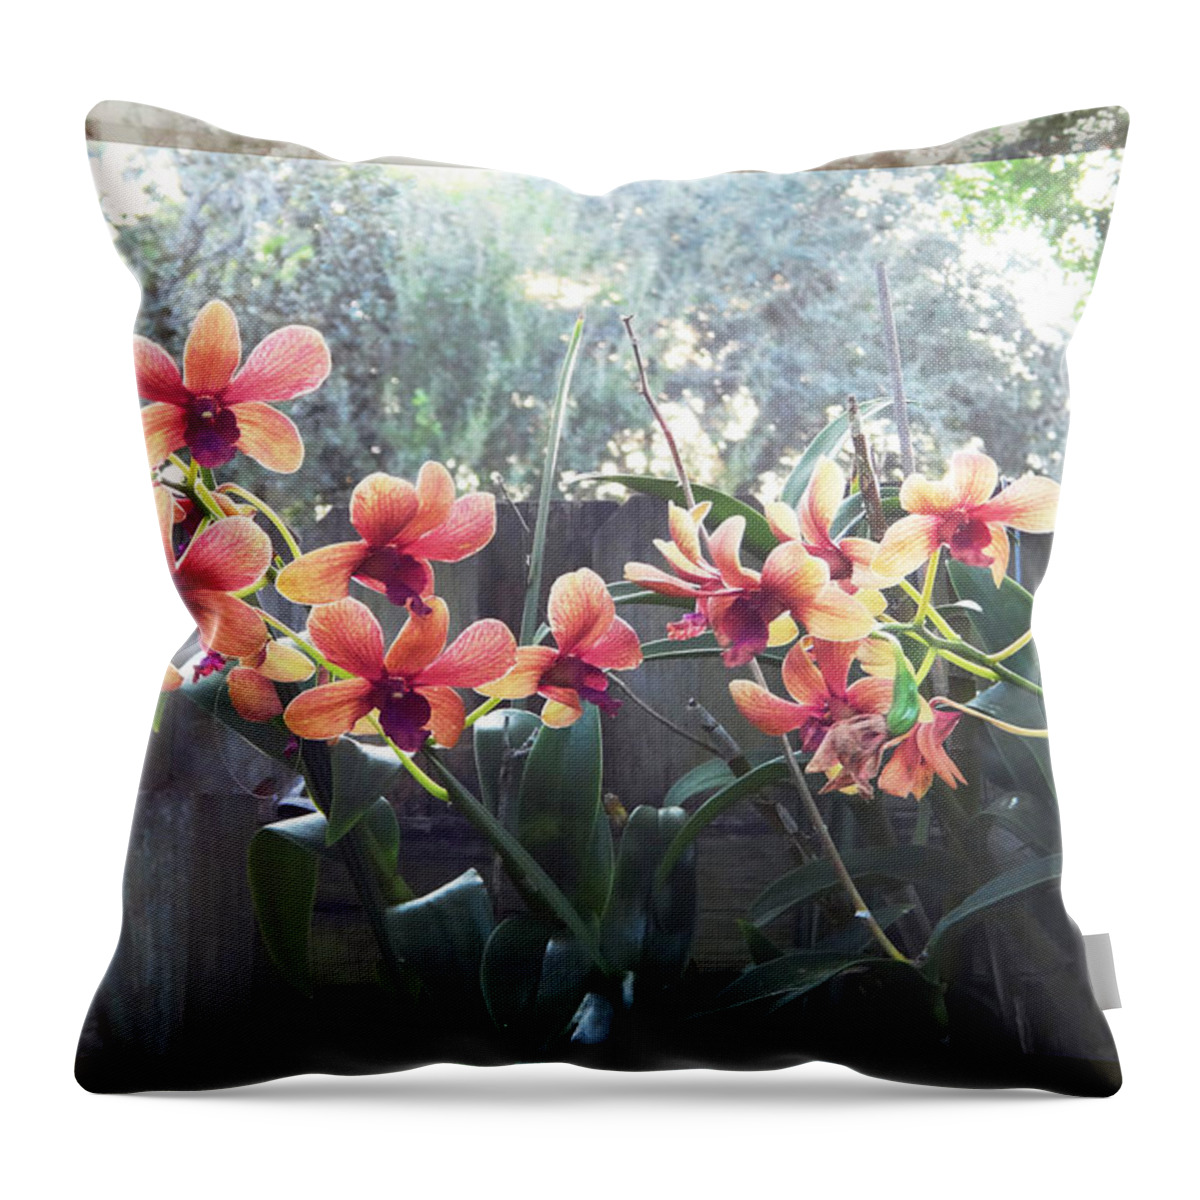 Orchids Throw Pillow featuring the photograph Misty Orchids by Ginny Schmidt